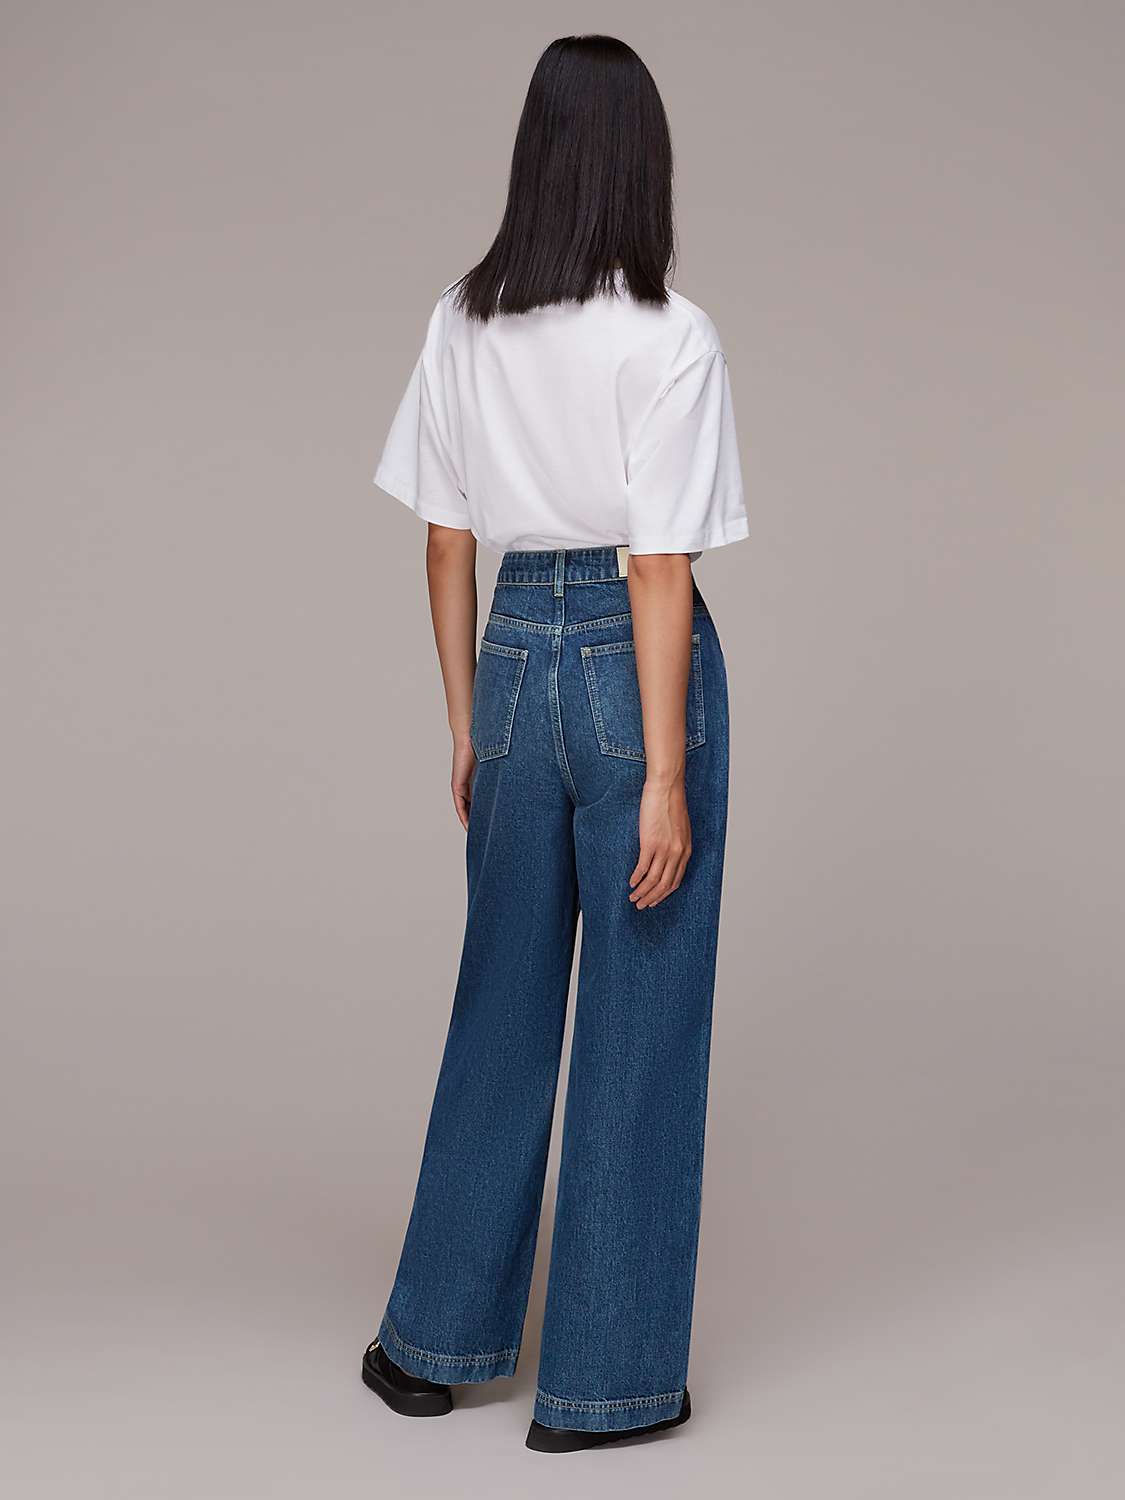 Buy Whistles Petite Authentic Raya Straight Jeans, Blue Online at johnlewis.com